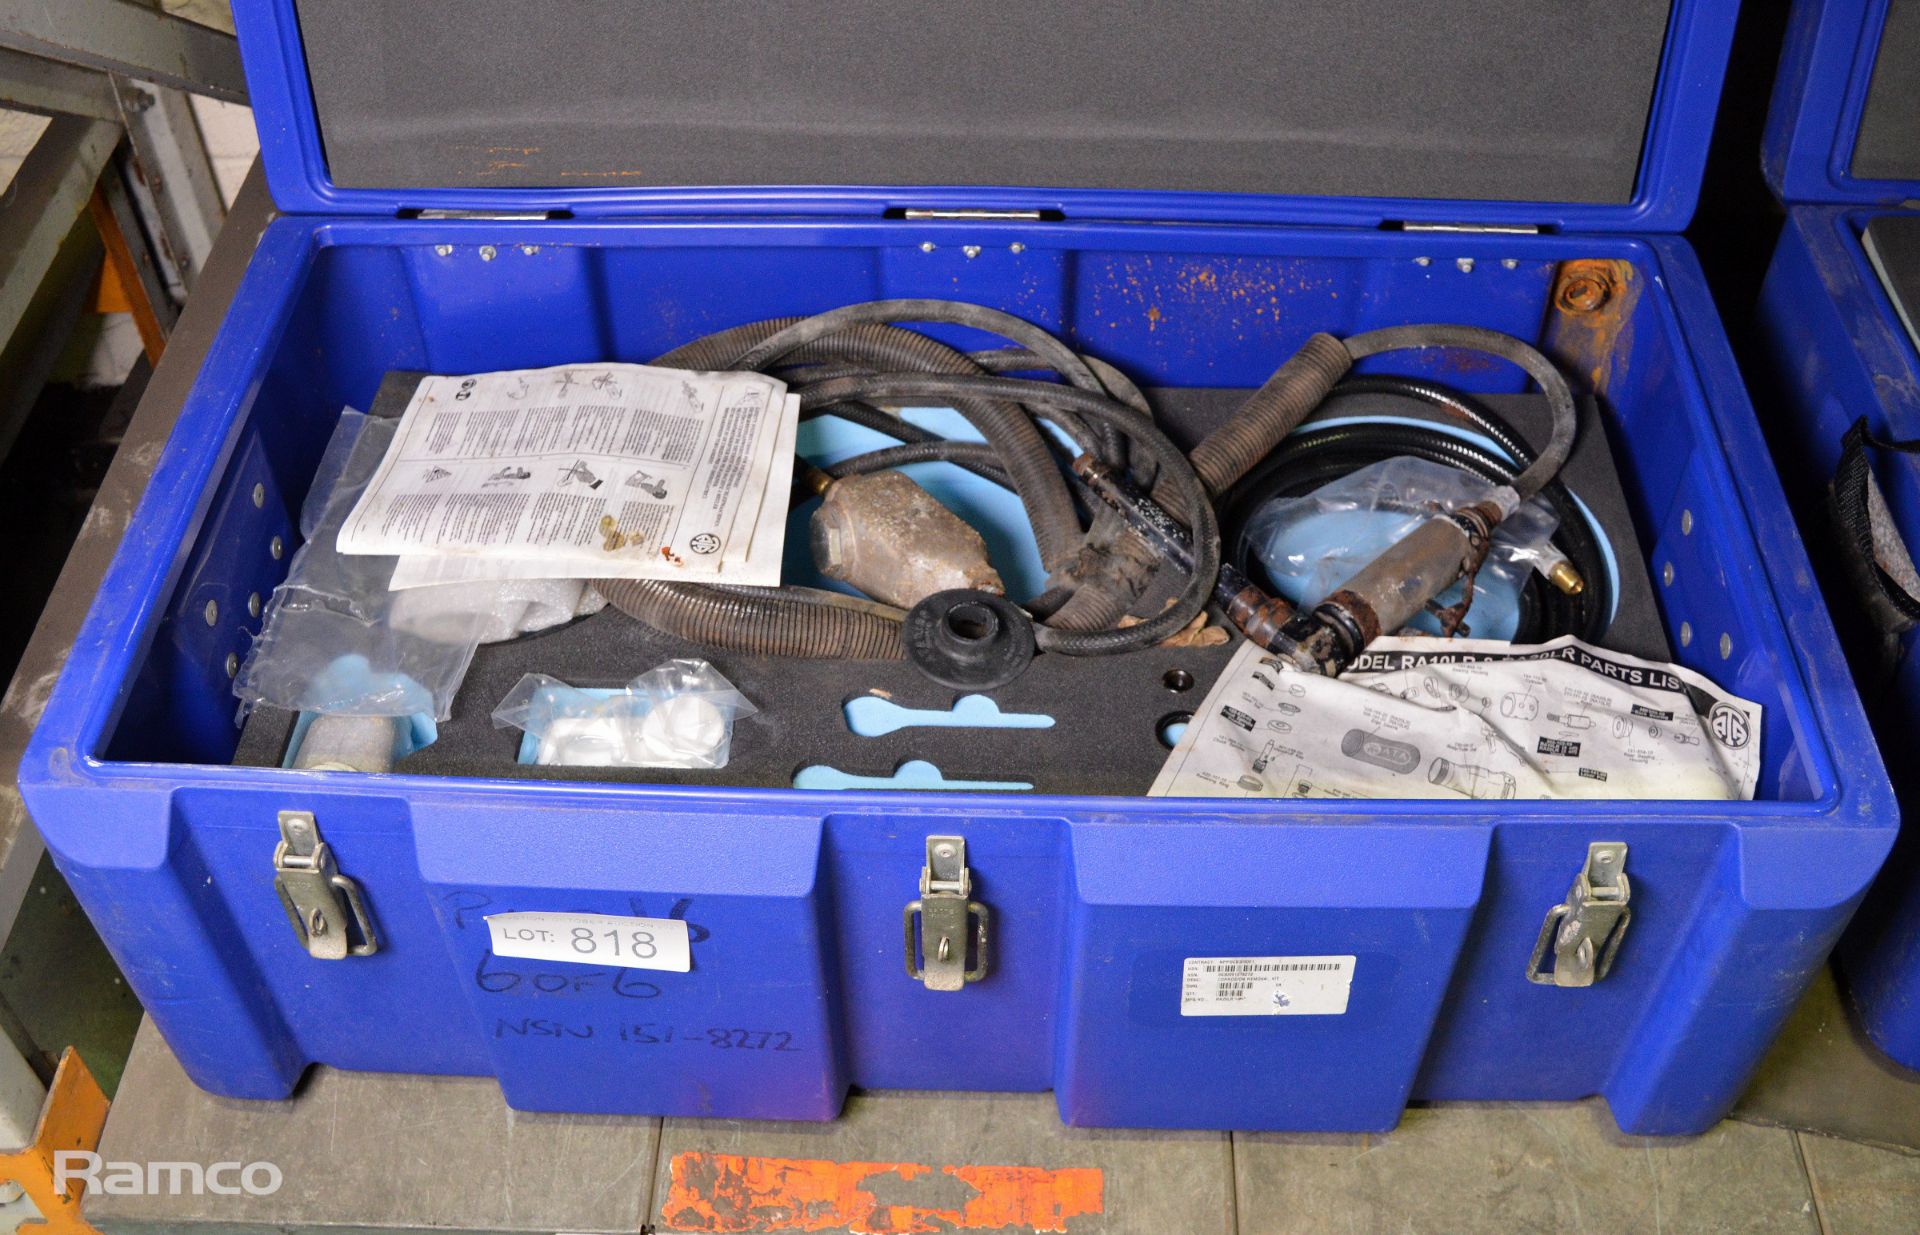 Corrosion removal kit in carry case - Image 5 of 8